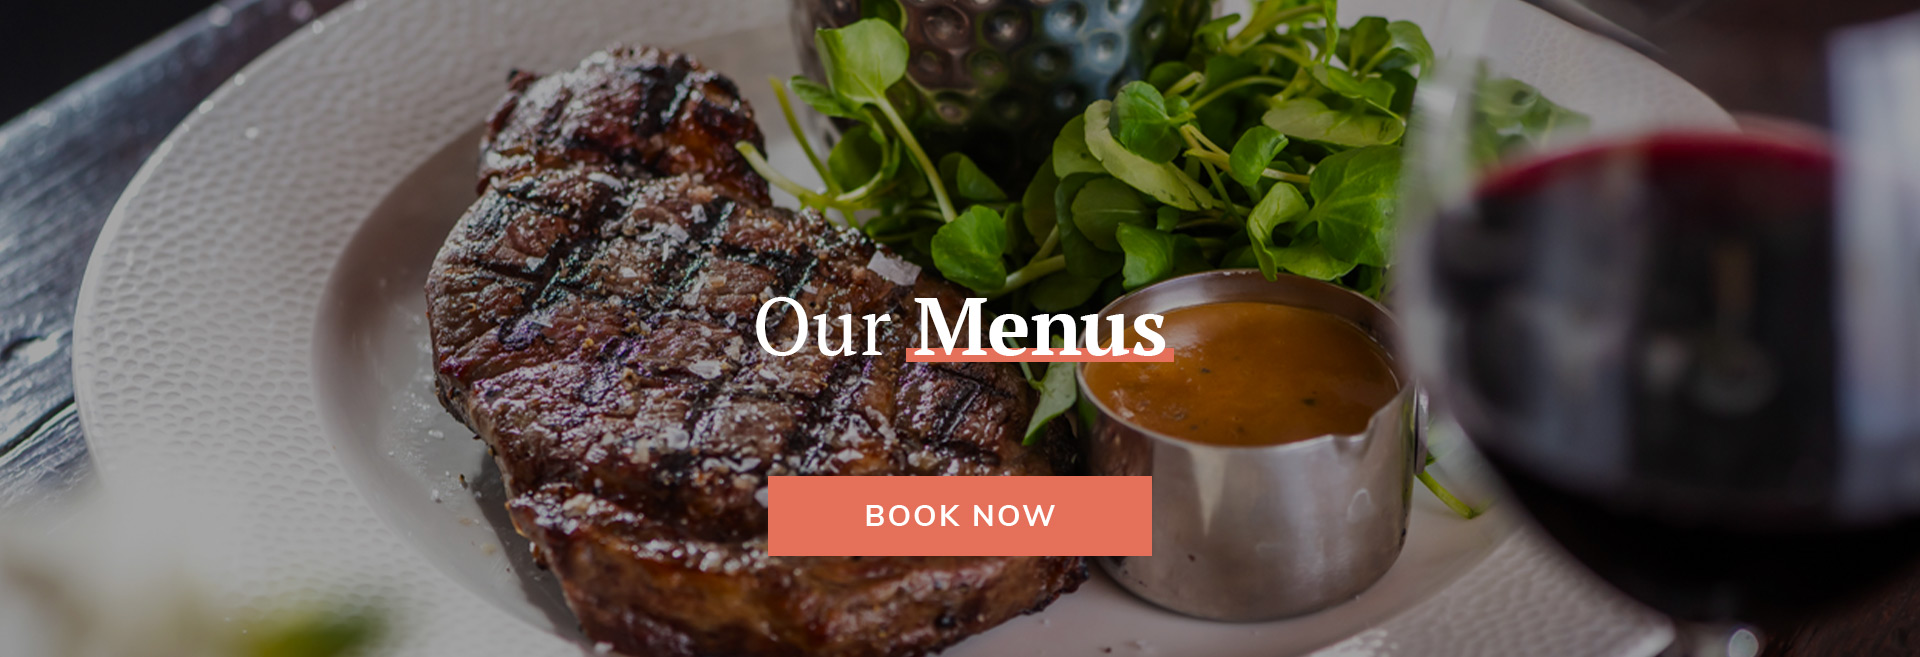 Book Now at The Royal Standard